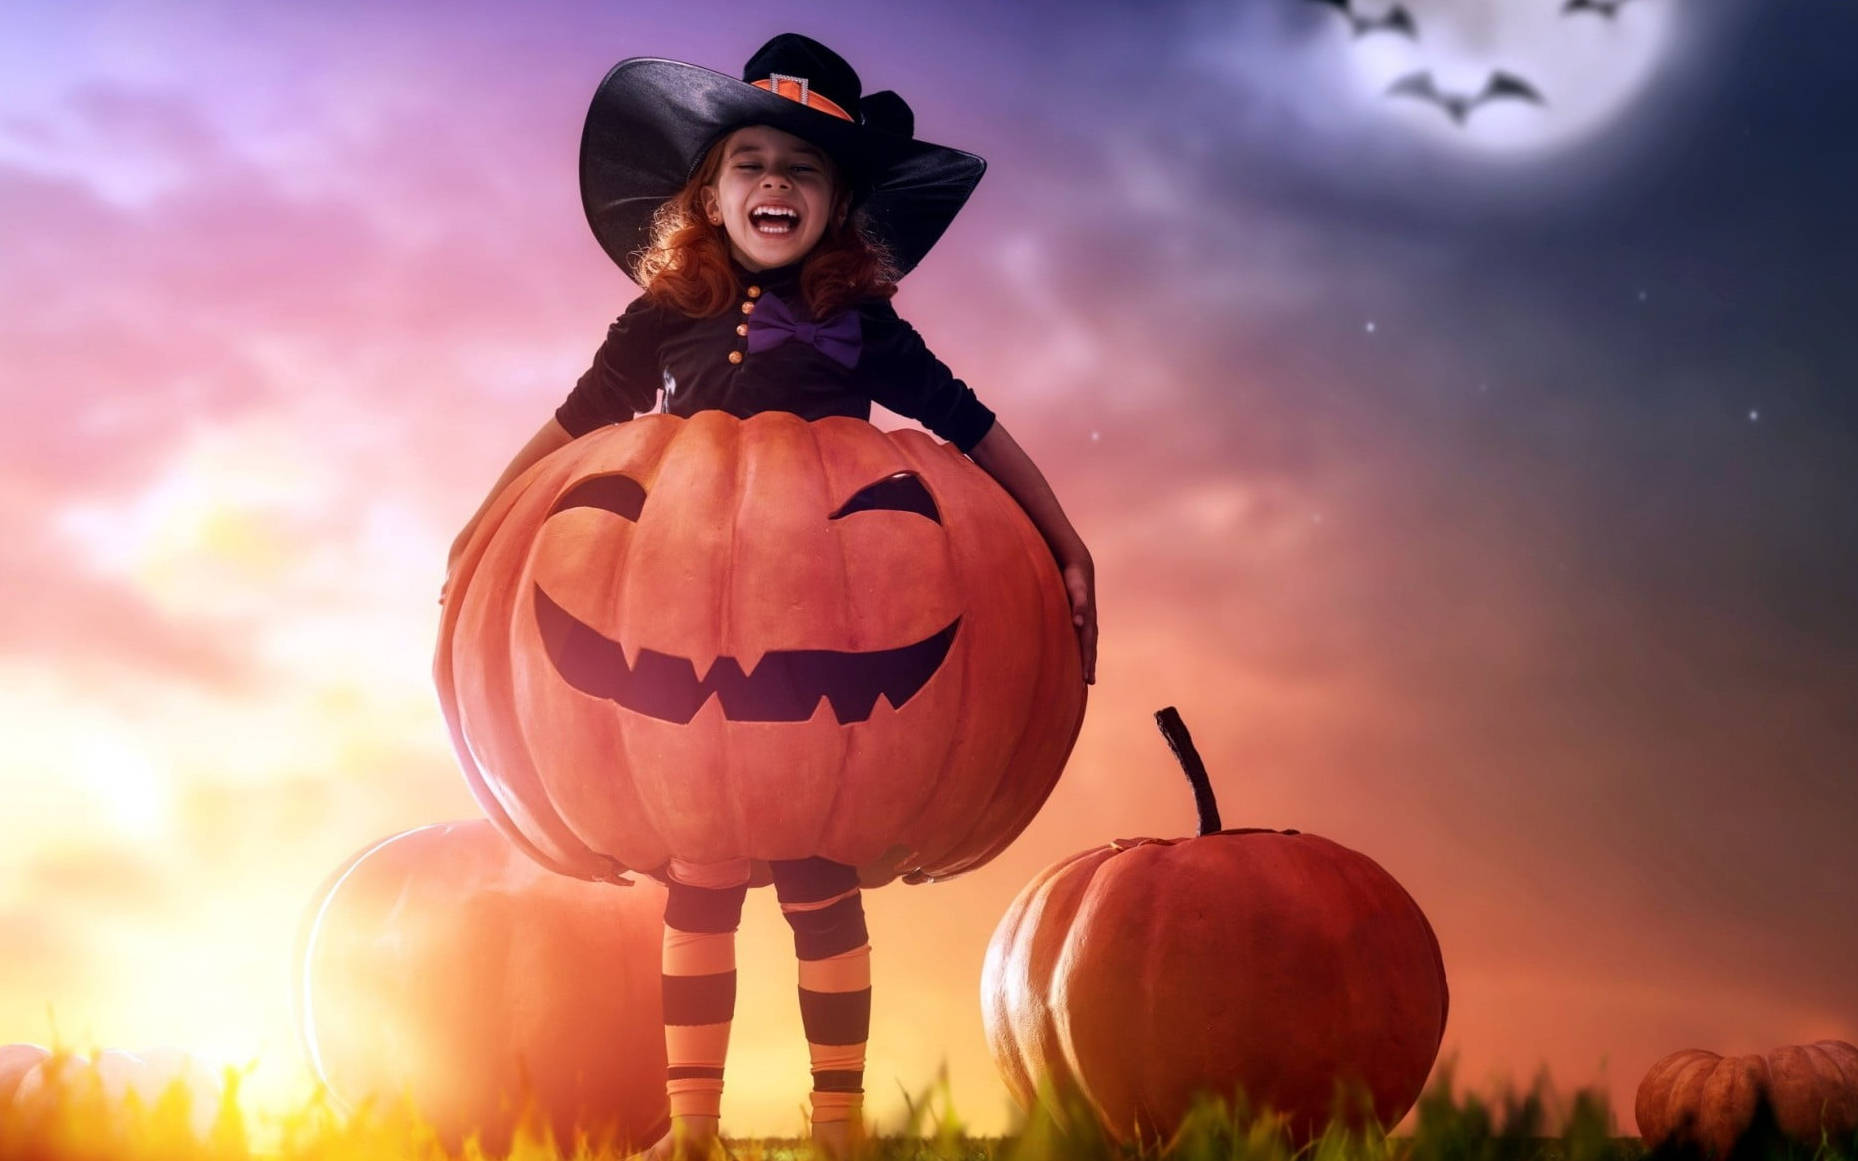 Cute Halloween Girl Laughing Background